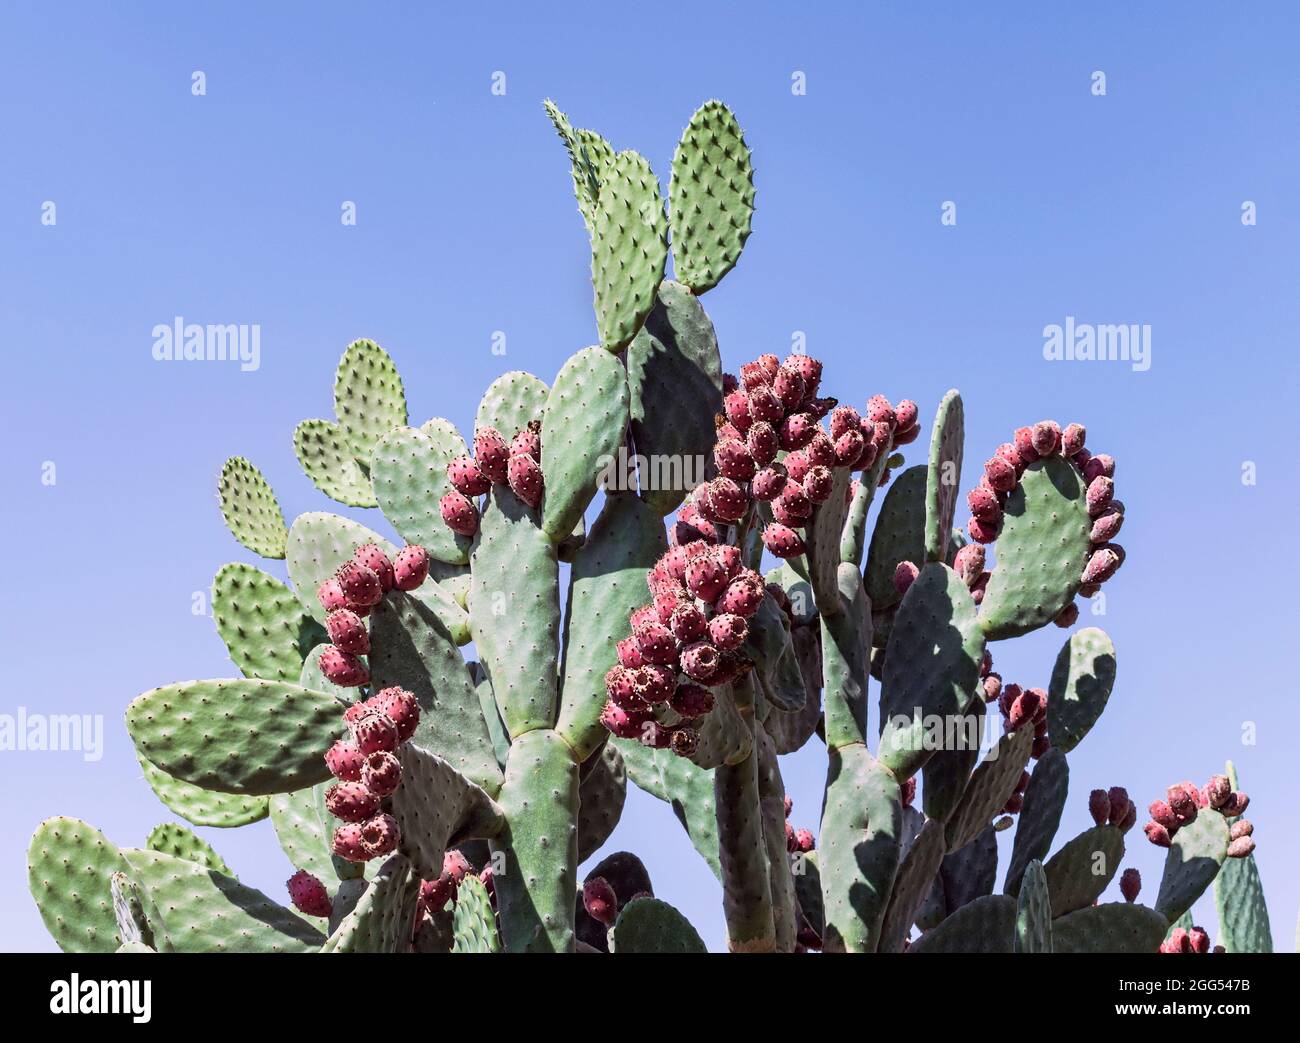 giant velvet prickly pear Opuntia tomentosa tree cactus with many bright red fruits framed by a clear blue sky Stock Photo